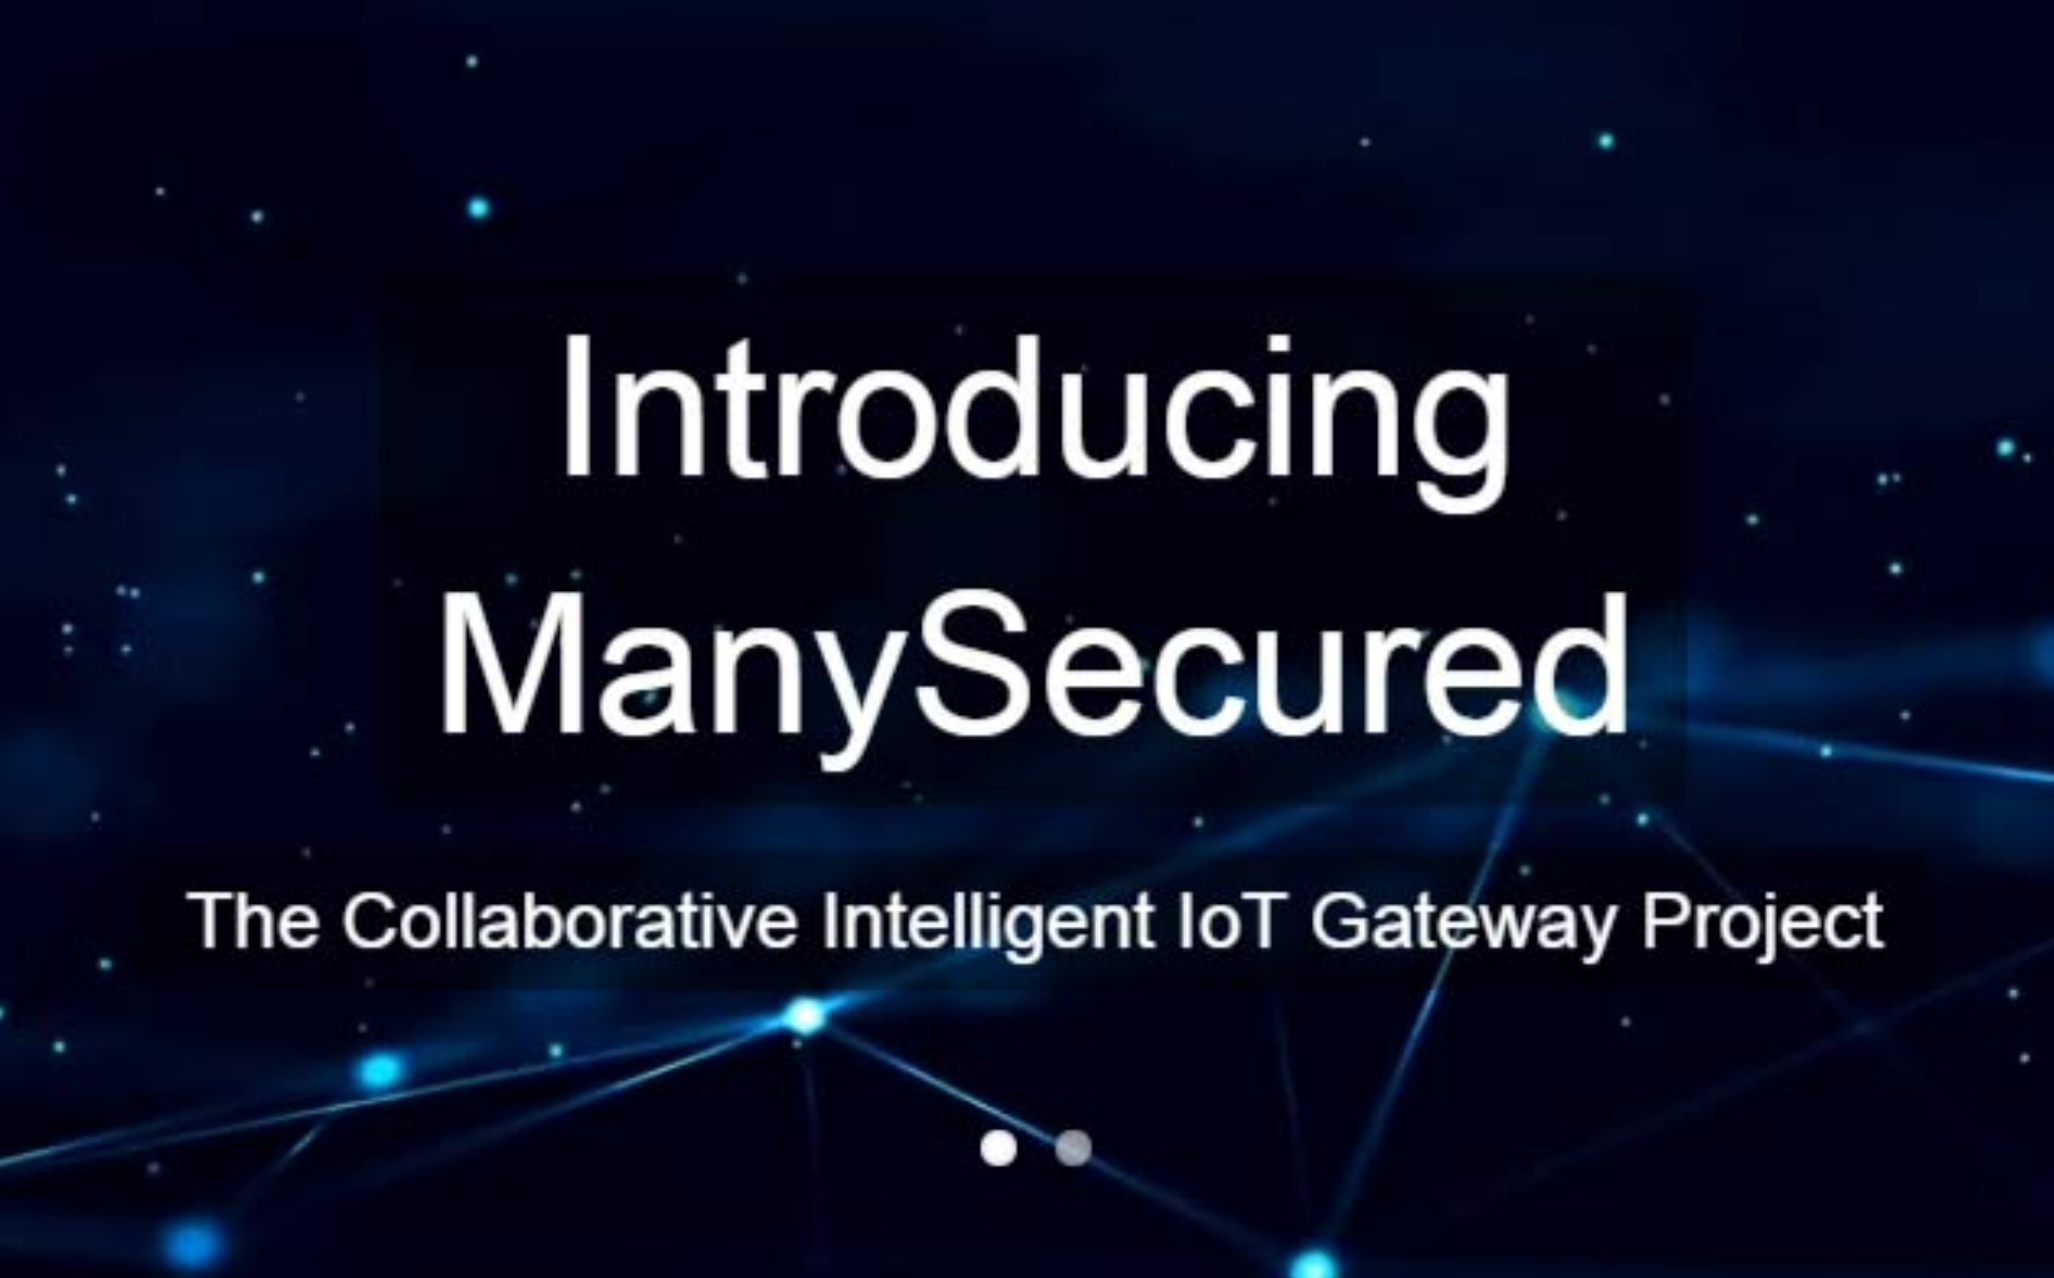 Introducing ManySecured - The Collaborative Intelligent Gateway Project